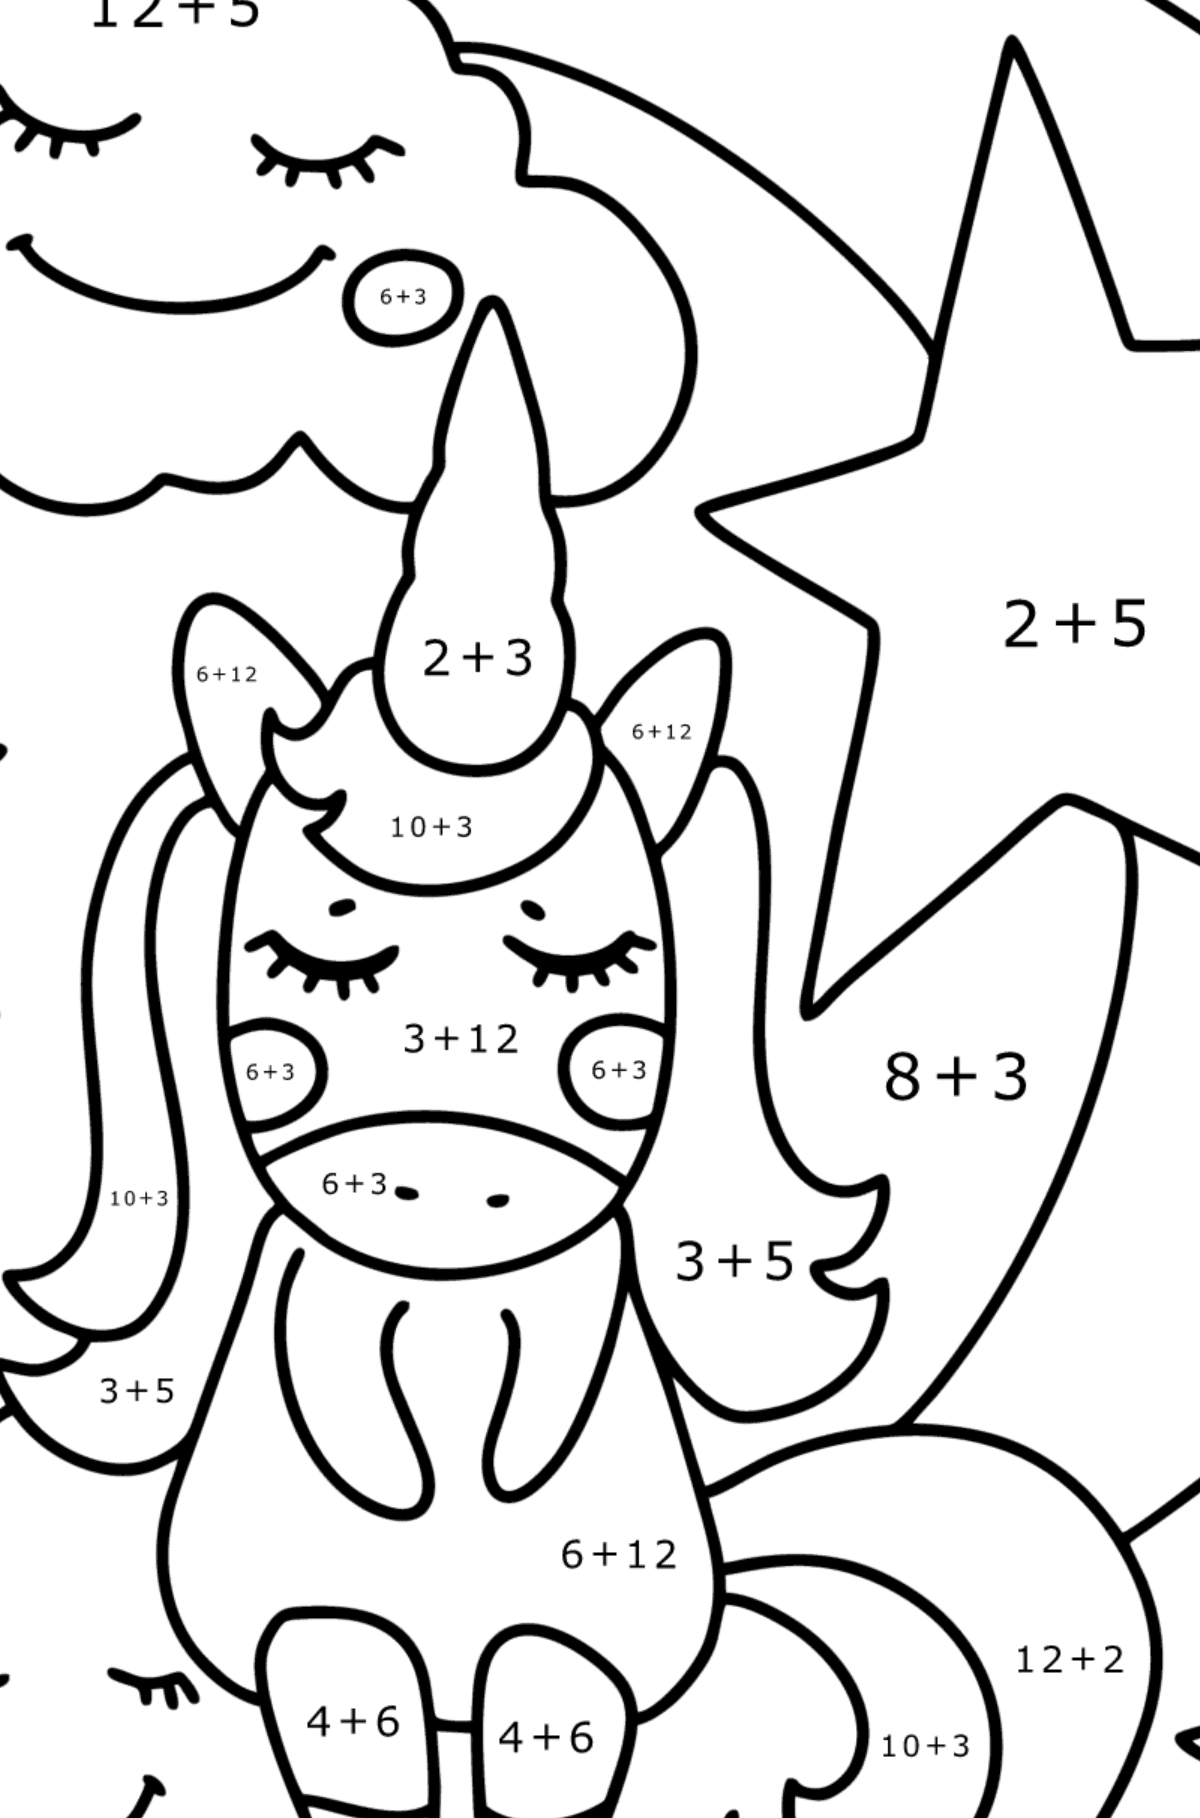 Star unicorn coloring page - Math Coloring - Addition for Kids